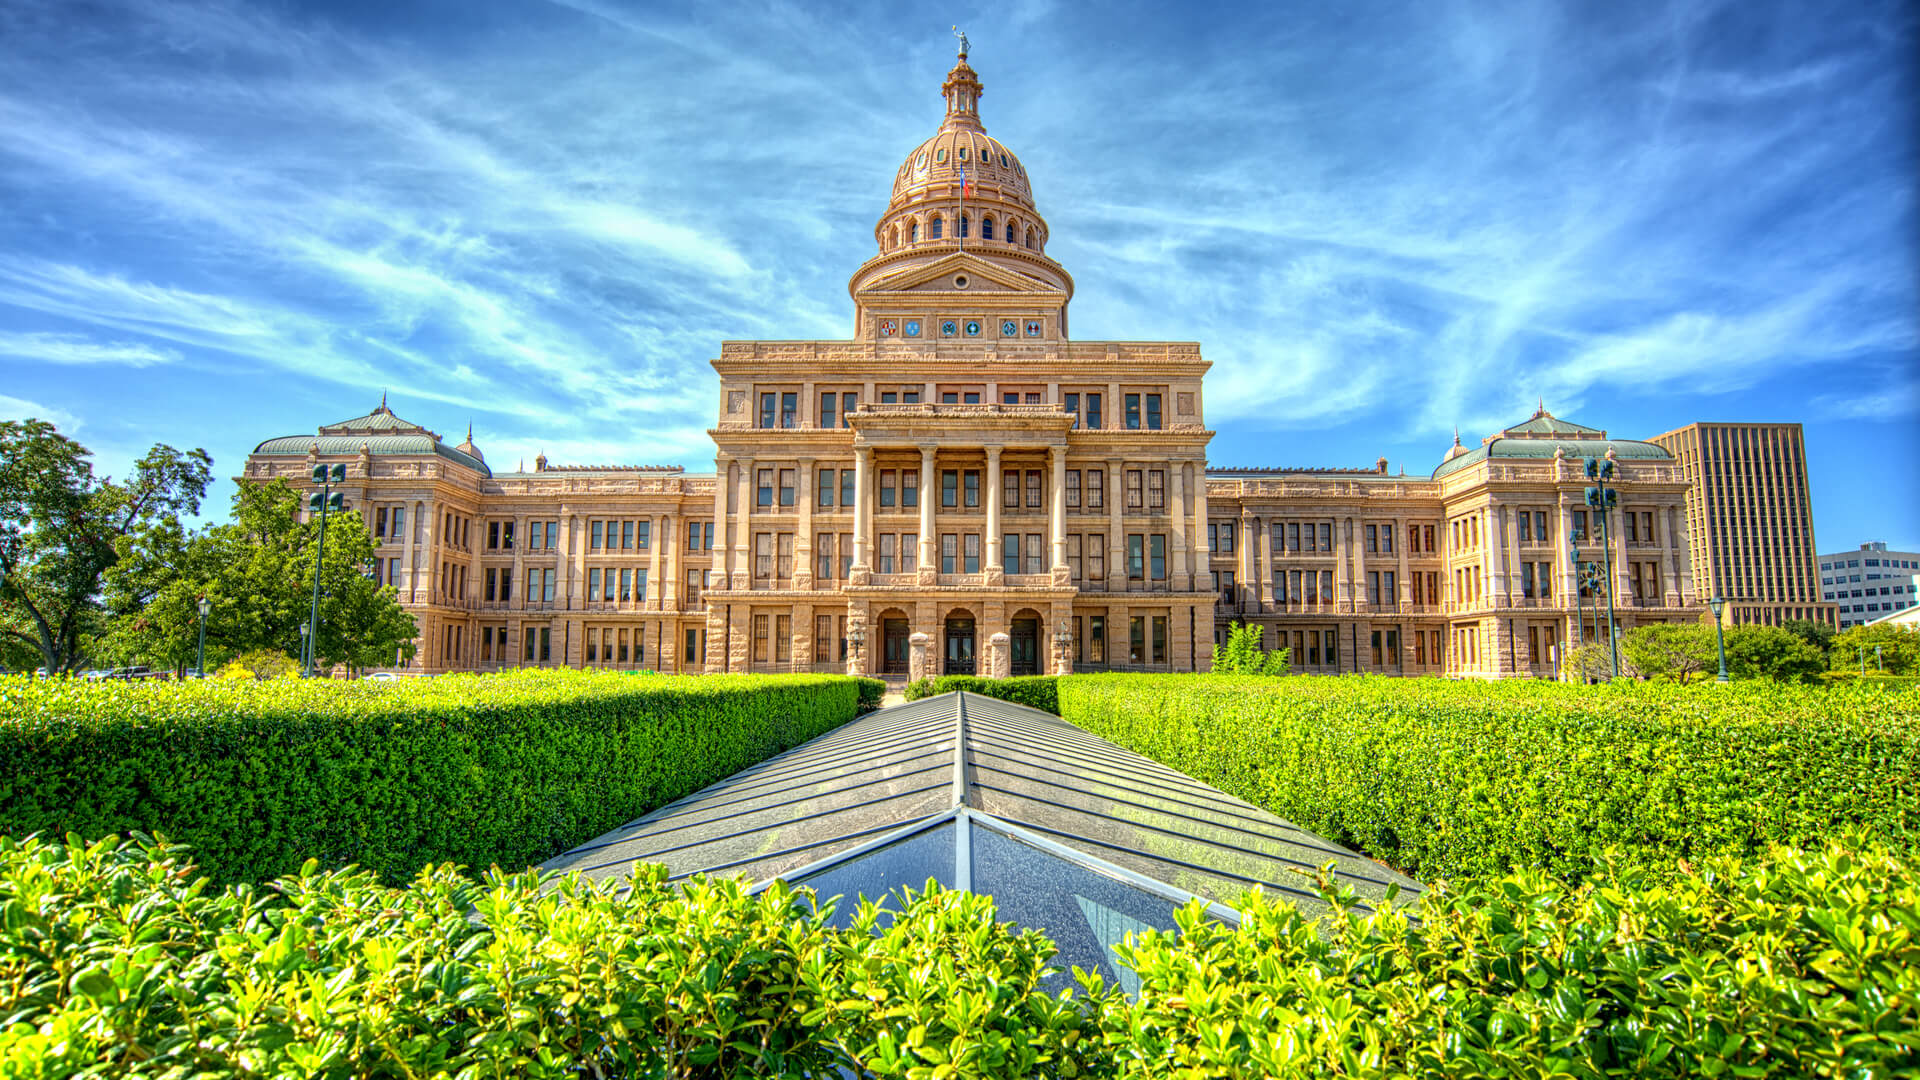 The Texas State Capitol Building in Austin, TX